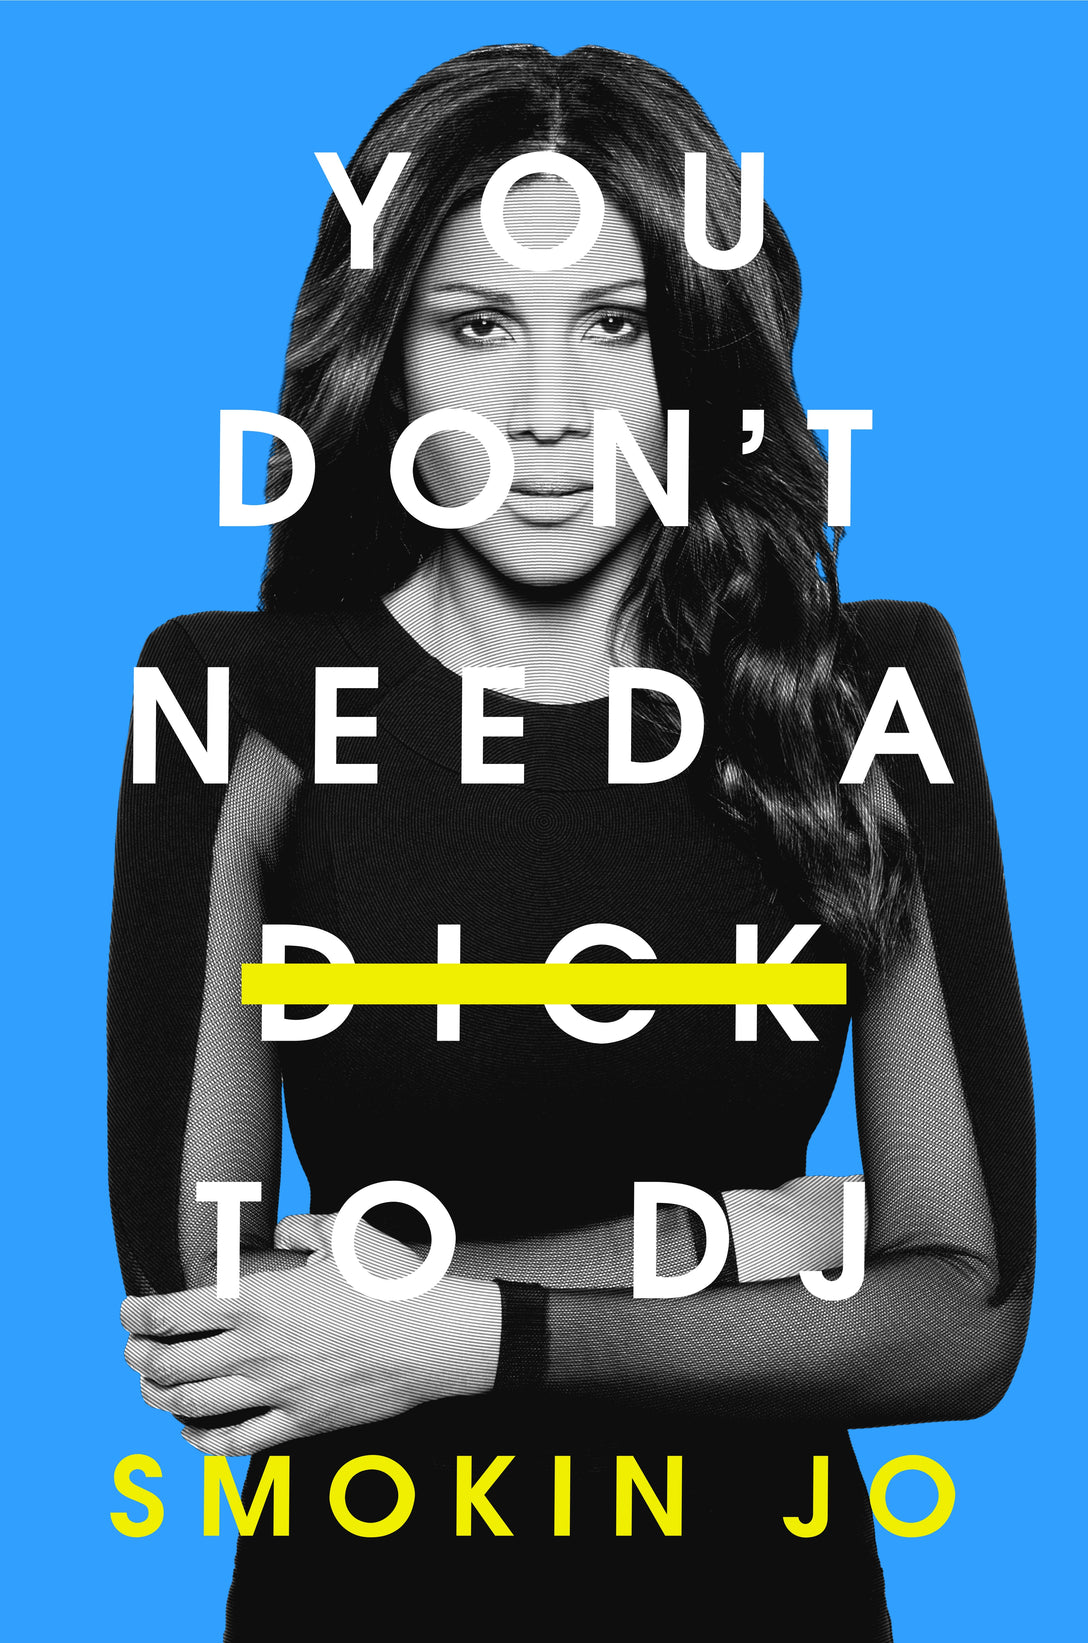 You Don't Need a Dick to DJ by Smokin Jo